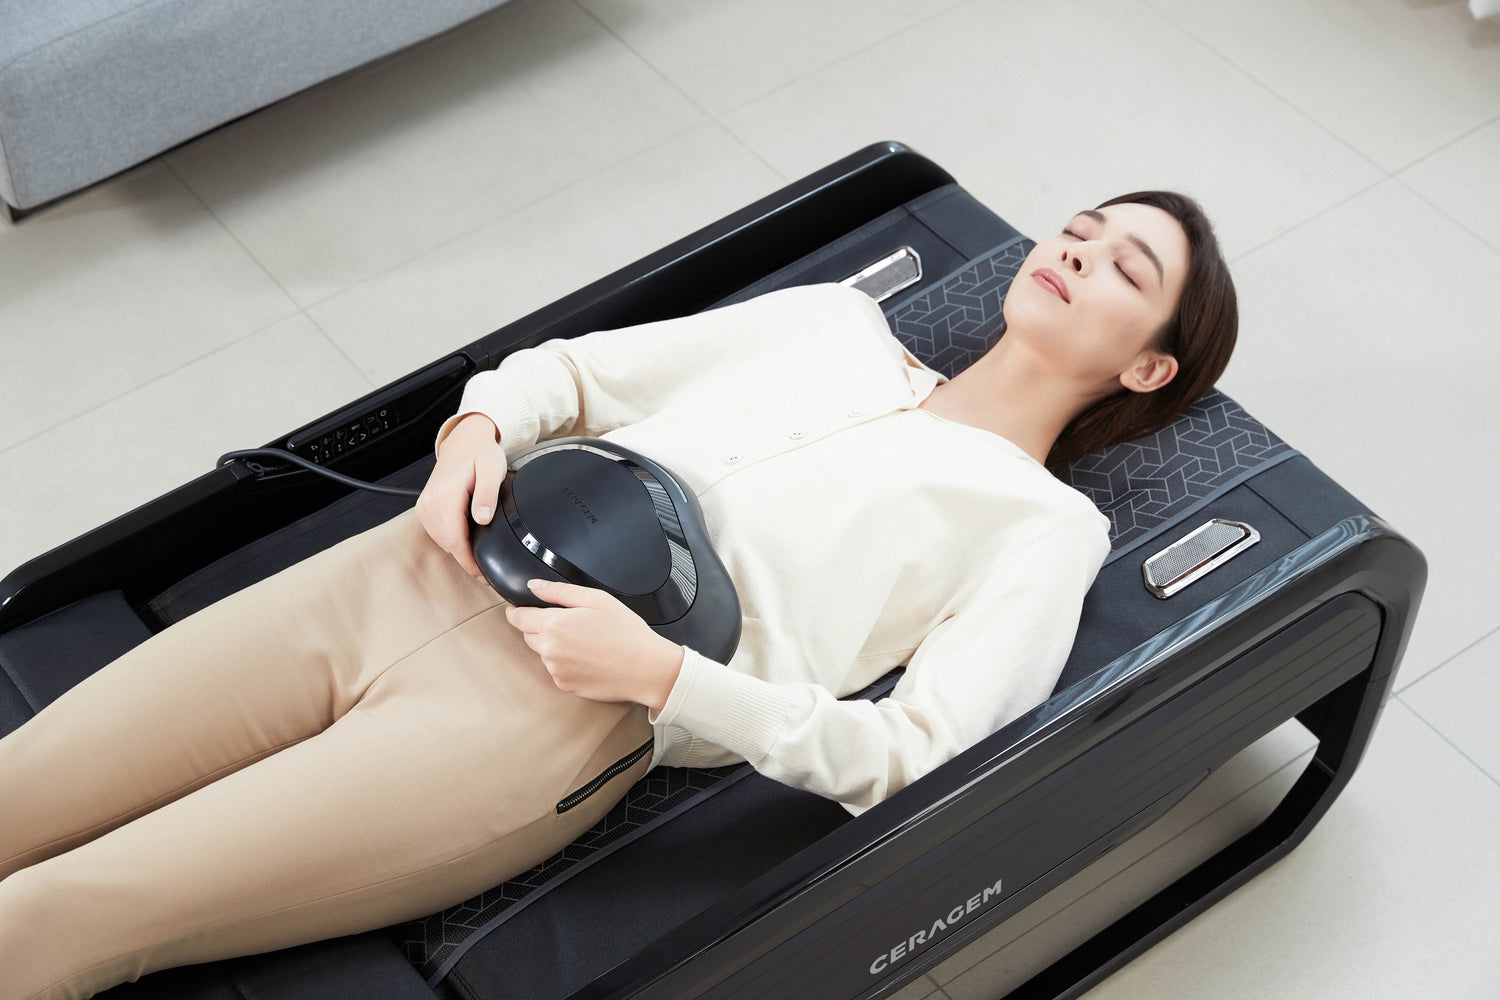 Unwind in Luxury: Heated Massager's 140°F Heat and Vibrations